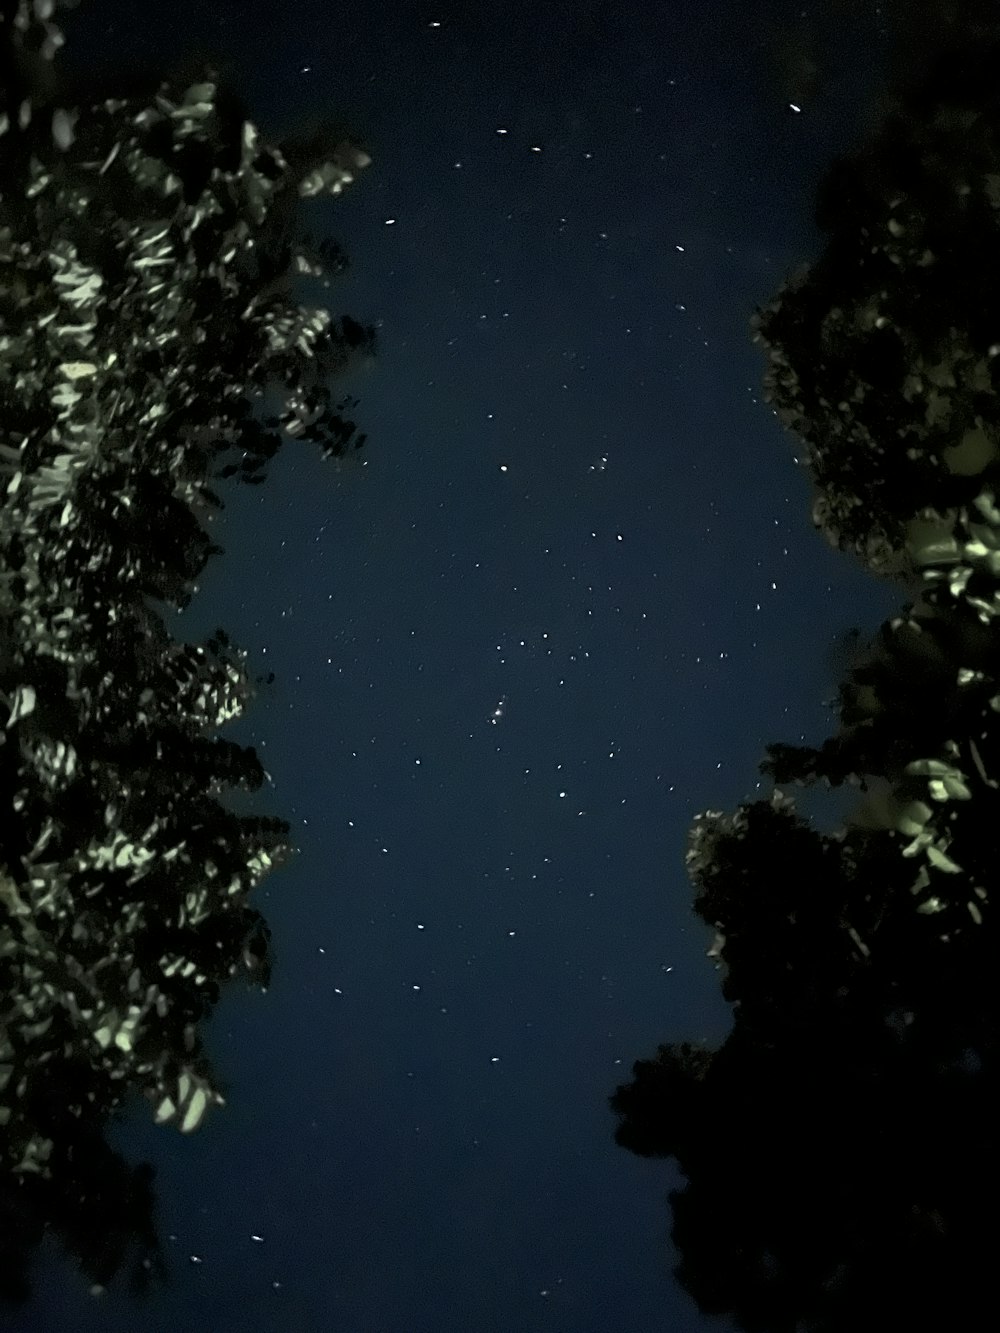 a night sky with stars and trees in the foreground